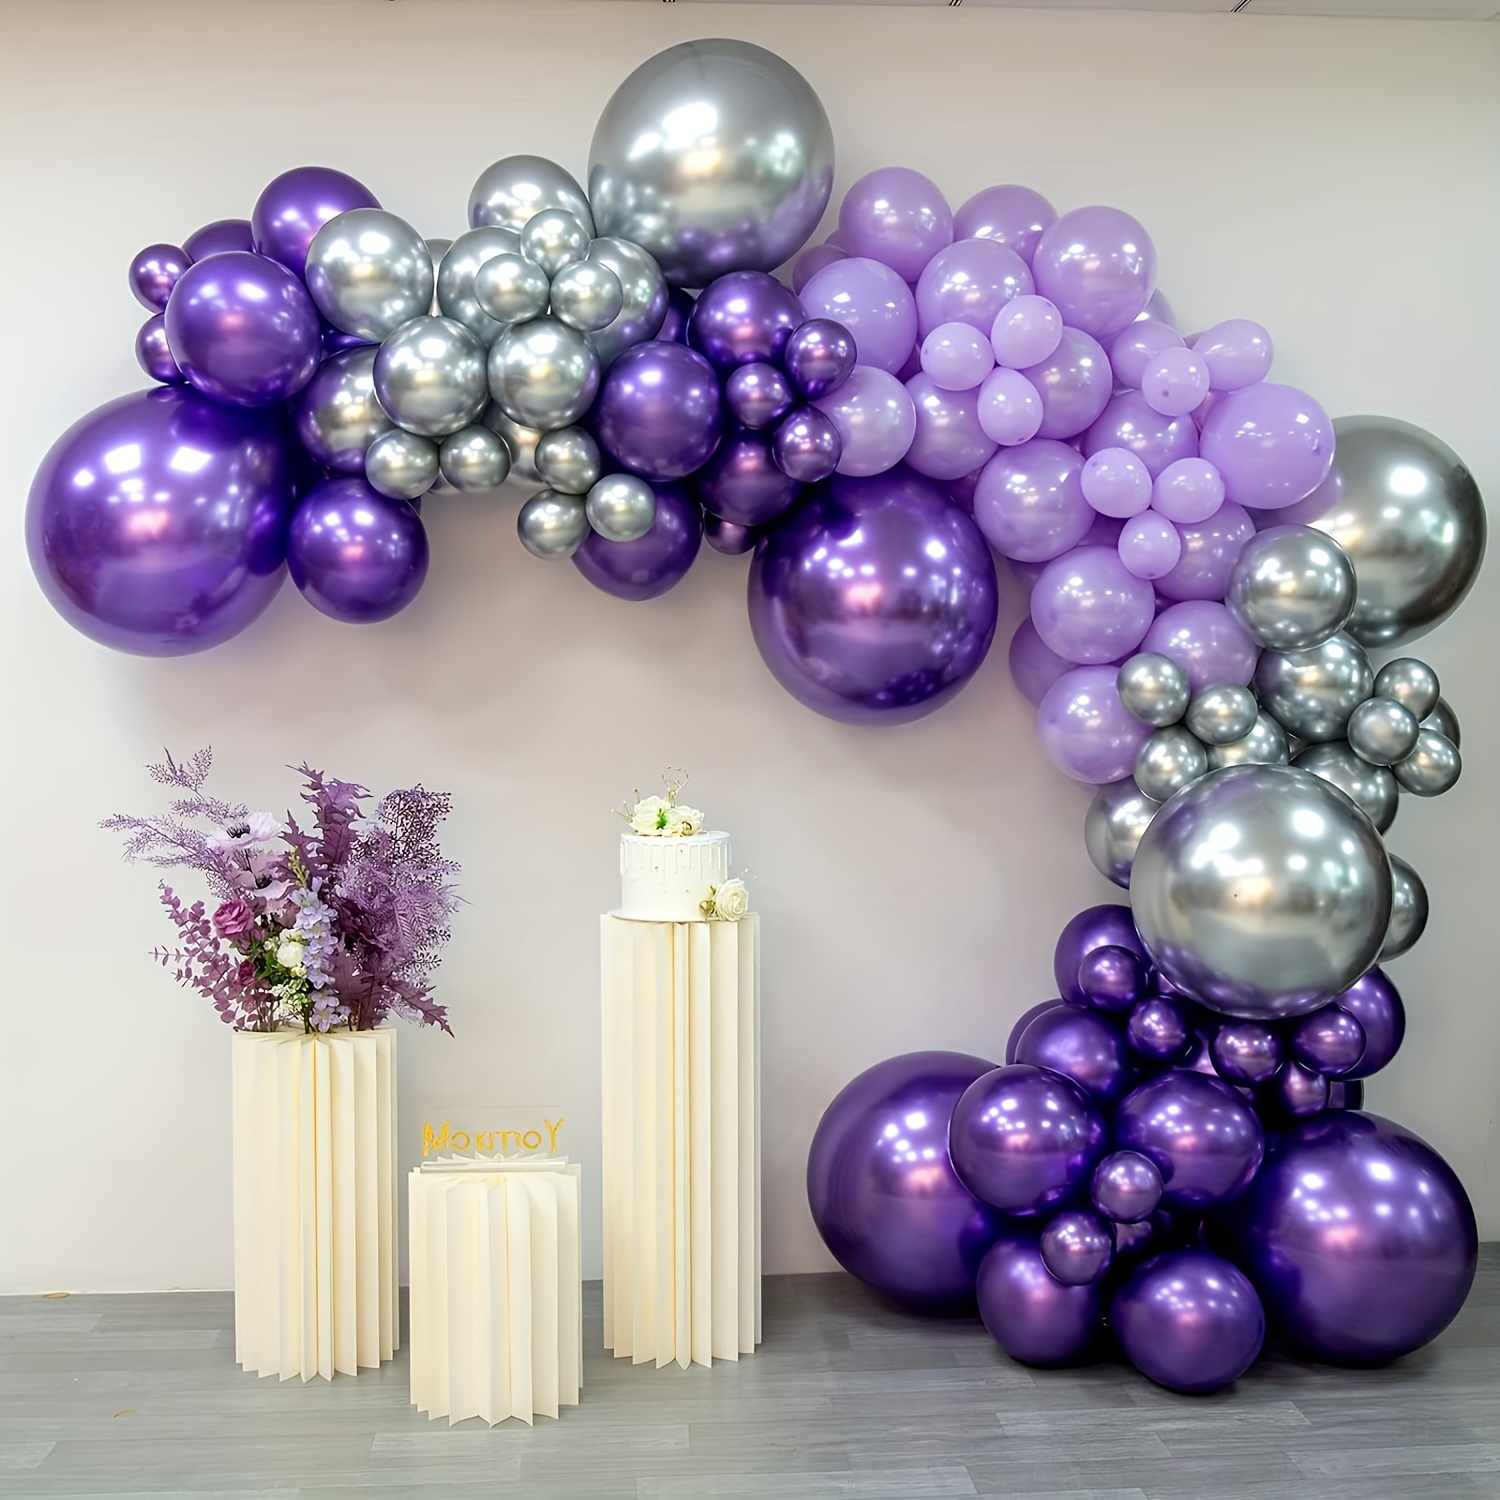 

130pcs Purple & Metallic Silver Latex Balloon Arch Kit For Birthday, Wedding, Bridal Shower, Mother's Day, Valentine's Anniversary Decor, Photo Prop - Suitable For Ages 14+